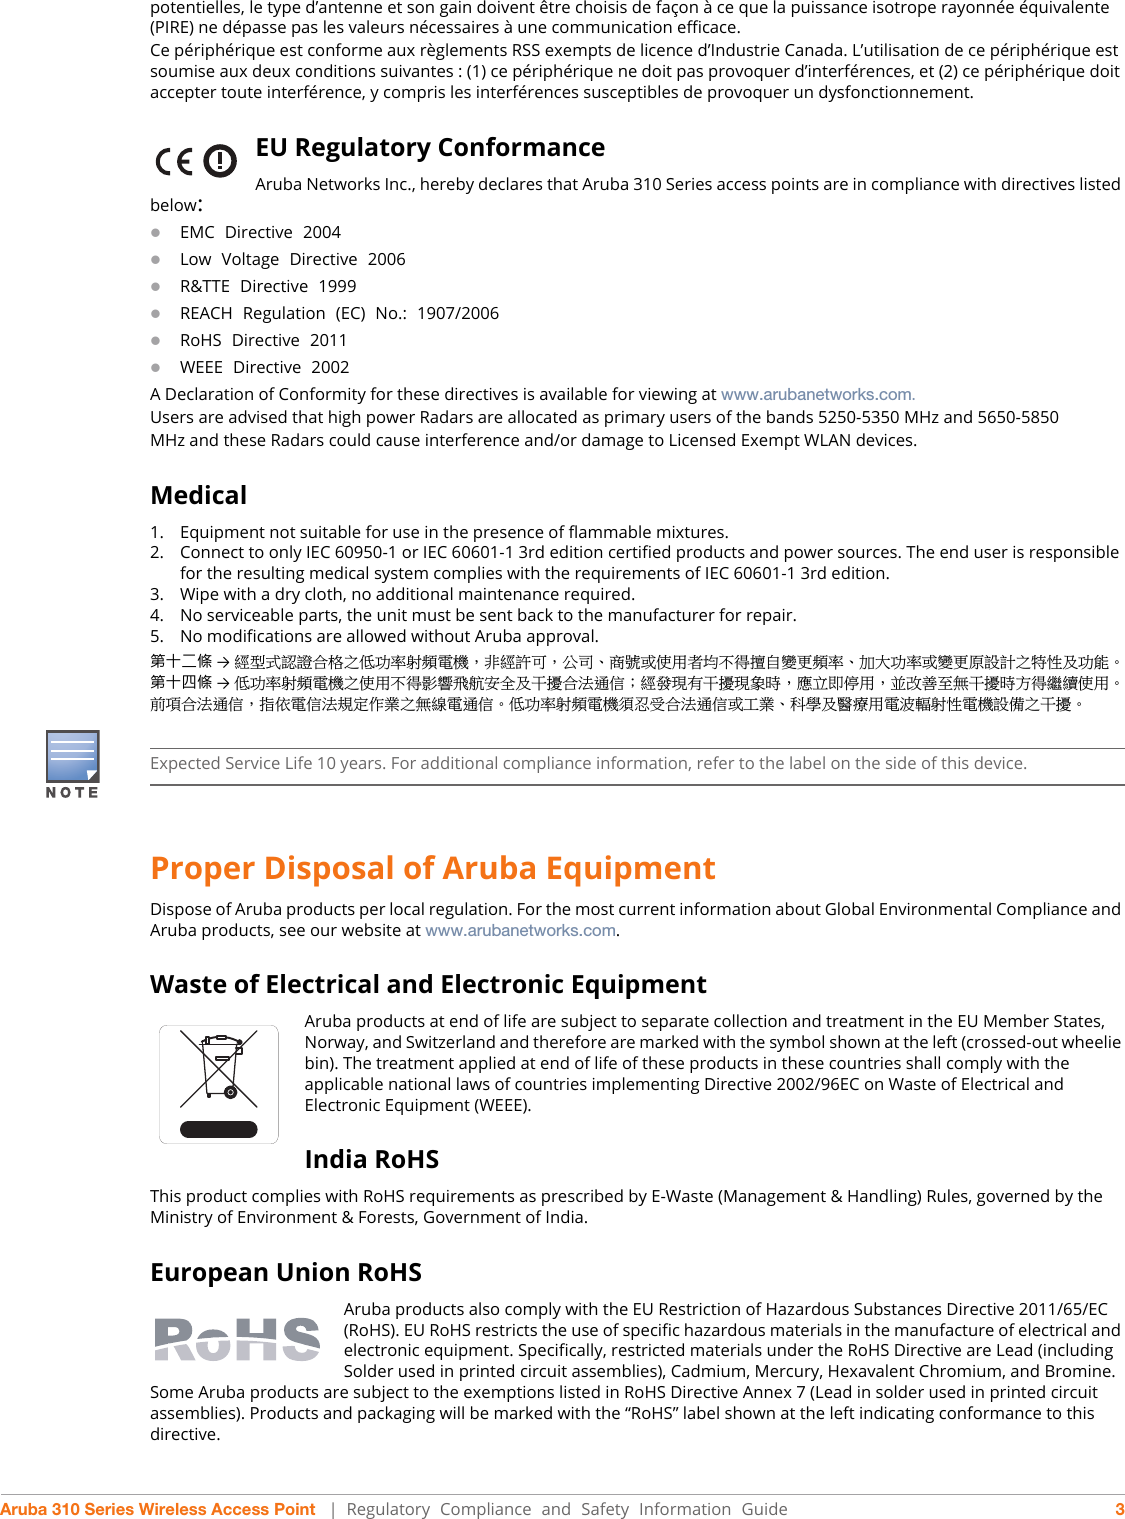 Aruba 310 Series Wireless Access Point   |  Regulatory Compliance and Safety Information Guide 3potentielles, le type d’antenne et son gain doivent être choisis de façon à ce que la puissance isotrope rayonnée équivalente (PIRE) ne dépasse pas les valeurs nécessaires à une communication efficace. Ce périphérique est conforme aux règlements RSS exempts de licence d’Industrie Canada. L’utilisation de ce périphérique est soumise aux deux conditions suivantes : (1) ce périphérique ne doit pas provoquer d’interférences, et (2) ce périphérique doit accepter toute interférence, y compris les interférences susceptibles de provoquer un dysfonctionnement.EU Regulatory Conformance Aruba Networks Inc., hereby declares that Aruba 310 Series access points are in compliance with directives listed below:EMC Directive 2004Low Voltage Directive 2006R&amp;TTE Directive 1999REACH Regulation (EC) No.: 1907/2006RoHS Directive 2011WEEE Directive 2002A Declaration of Conformity for these directives is available for viewing at www.arubanetworks.com.Users are advised that high power Radars are allocated as primary users of the bands 5250-5350 MHz and 5650-5850MHz and these Radars could cause interference and/or damage to Licensed Exempt WLAN devices.Medical1. Equipment not suitable for use in the presence of flammable mixtures.2. Connect to only IEC 60950-1 or IEC 60601-1 3rd edition certified products and power sources. The end user is responsible for the resulting medical system complies with the requirements of IEC 60601-1 3rd edition.3. Wipe with a dry cloth, no additional maintenance required.4. No serviceable parts, the unit must be sent back to the manufacturer for repair.5. No modifications are allowed without Aruba approval.䬓⌨ṳ㢄 →䴻✳⺷娵嫱⎰㟤ᷳỶ≇䌯⮬柣暣㨇炻朆䴻姙⎗炻℔⎠ˣ⓮嘇ㆾἧ䓐侭⛯ᶵ⼿㑭冒嬲㚜柣䌯ˣ≈⣏≇䌯ㆾ嬲㚜⍇姕妰ᷳ䈡⿏⍲≇傥ˤ 䬓⌨⛂㢄 →Ỷ≇䌯⮬柣暣㨇ᷳἧ䓐ᶵ⼿⼙枧梃凒⬱ℐ⍲⸚㒦⎰㱽忂ᾉ烊䴻䘤䎦㚱⸚㒦䎦尉㗪炻ㅱ䩳⌛ 䓐炻᷎㓡┬军䃉⸚㒦㗪㕡⼿两临ἧ䓐ˤ ⇵枭⎰㱽忂ᾉ炻㊯ὅ暣ᾉ㱽夷⭂ἄ㤕ᷳ䃉䶂暣忂ᾉˤ Ỷ≇䌯⮬柣暣㨇枰⽵⍿⎰㱽忂ᾉㆾⶍ㤕ˣ䥹⬠⍲慓䗪䓐暣㲊廣⮬⿏暣㨇姕⁁ᷳ⸚㒦ˤProper Disposal of Aruba EquipmentDispose of Aruba products per local regulation. For the most current information about Global Environmental Compliance and Aruba products, see our website at www.arubanetworks.com.Waste of Electrical and Electronic EquipmentAruba products at end of life are subject to separate collection and treatment in the EU Member States, Norway, and Switzerland and therefore are marked with the symbol shown at the left (crossed-out wheelie bin). The treatment applied at end of life of these products in these countries shall comply with the applicable national laws of countries implementing Directive 2002/96EC on Waste of Electrical and Electronic Equipment (WEEE).India RoHSThis product complies with RoHS requirements as prescribed by E-Waste (Management &amp; Handling) Rules, governed by the Ministry of Environment &amp; Forests, Government of India.European Union RoHSAruba products also comply with the EU Restriction of Hazardous Substances Directive 2011/65/EC (RoHS). EU RoHS restricts the use of specific hazardous materials in the manufacture of electrical and electronic equipment. Specifically, restricted materials under the RoHS Directive are Lead (including Solder used in printed circuit assemblies), Cadmium, Mercury, Hexavalent Chromium, and Bromine. Some Aruba products are subject to the exemptions listed in RoHS Directive Annex 7 (Lead in solder used in printed circuit assemblies). Products and packaging will be marked with the “RoHS” label shown at the left indicating conformance to this directive.Expected Service Life 10 years. For additional compliance information, refer to the label on the side of this device.